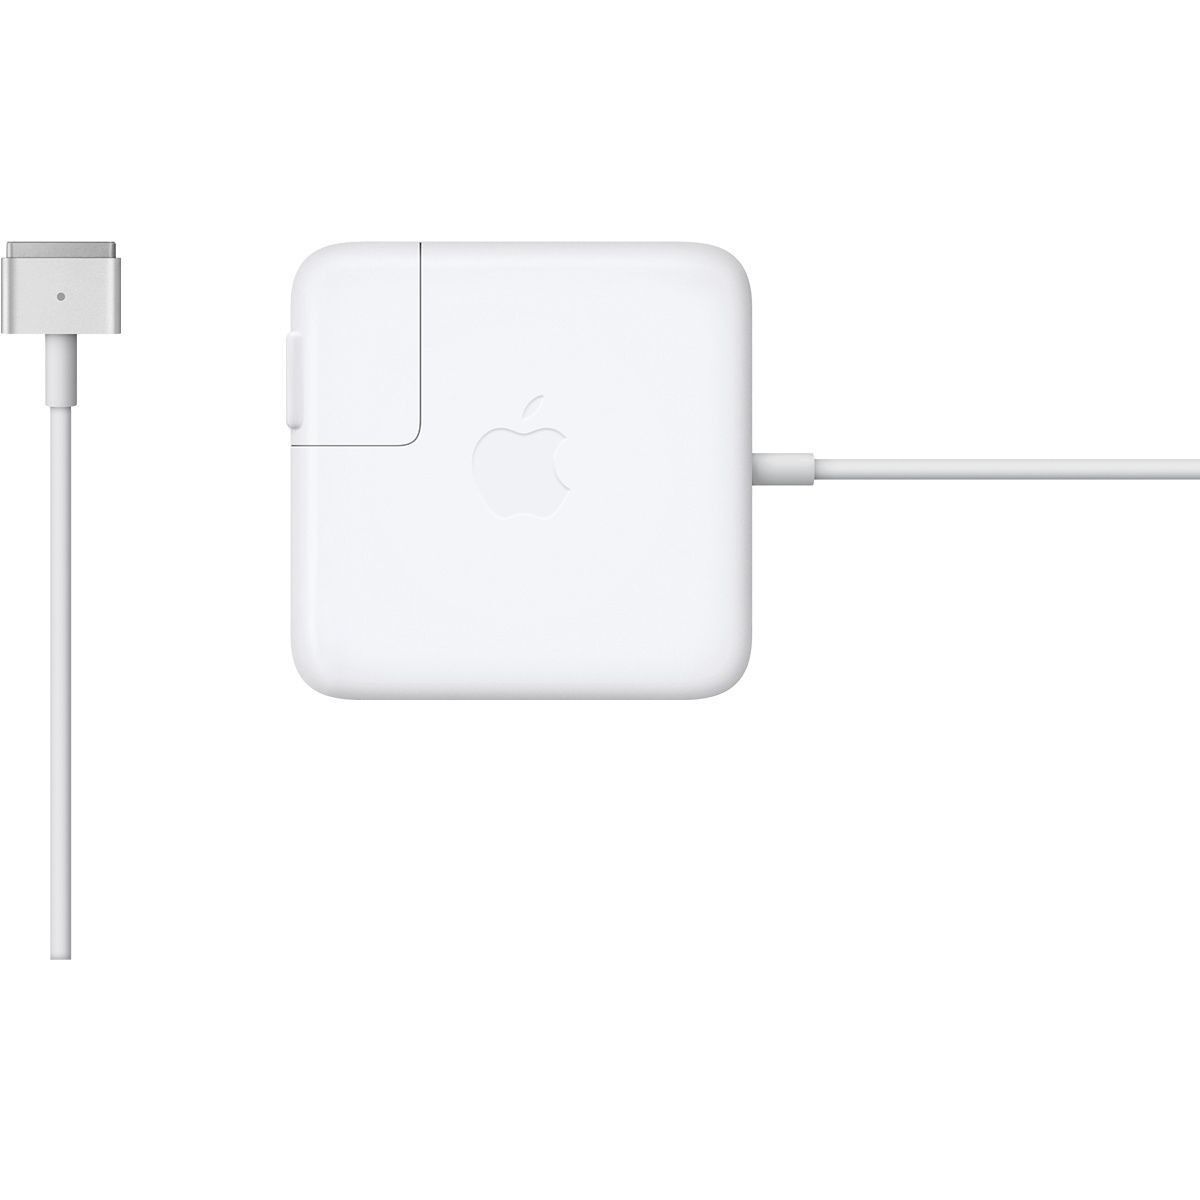 New Genuine Original APPLE MacBook Air Magsafe 2 45W Power Adapter Charger A1436